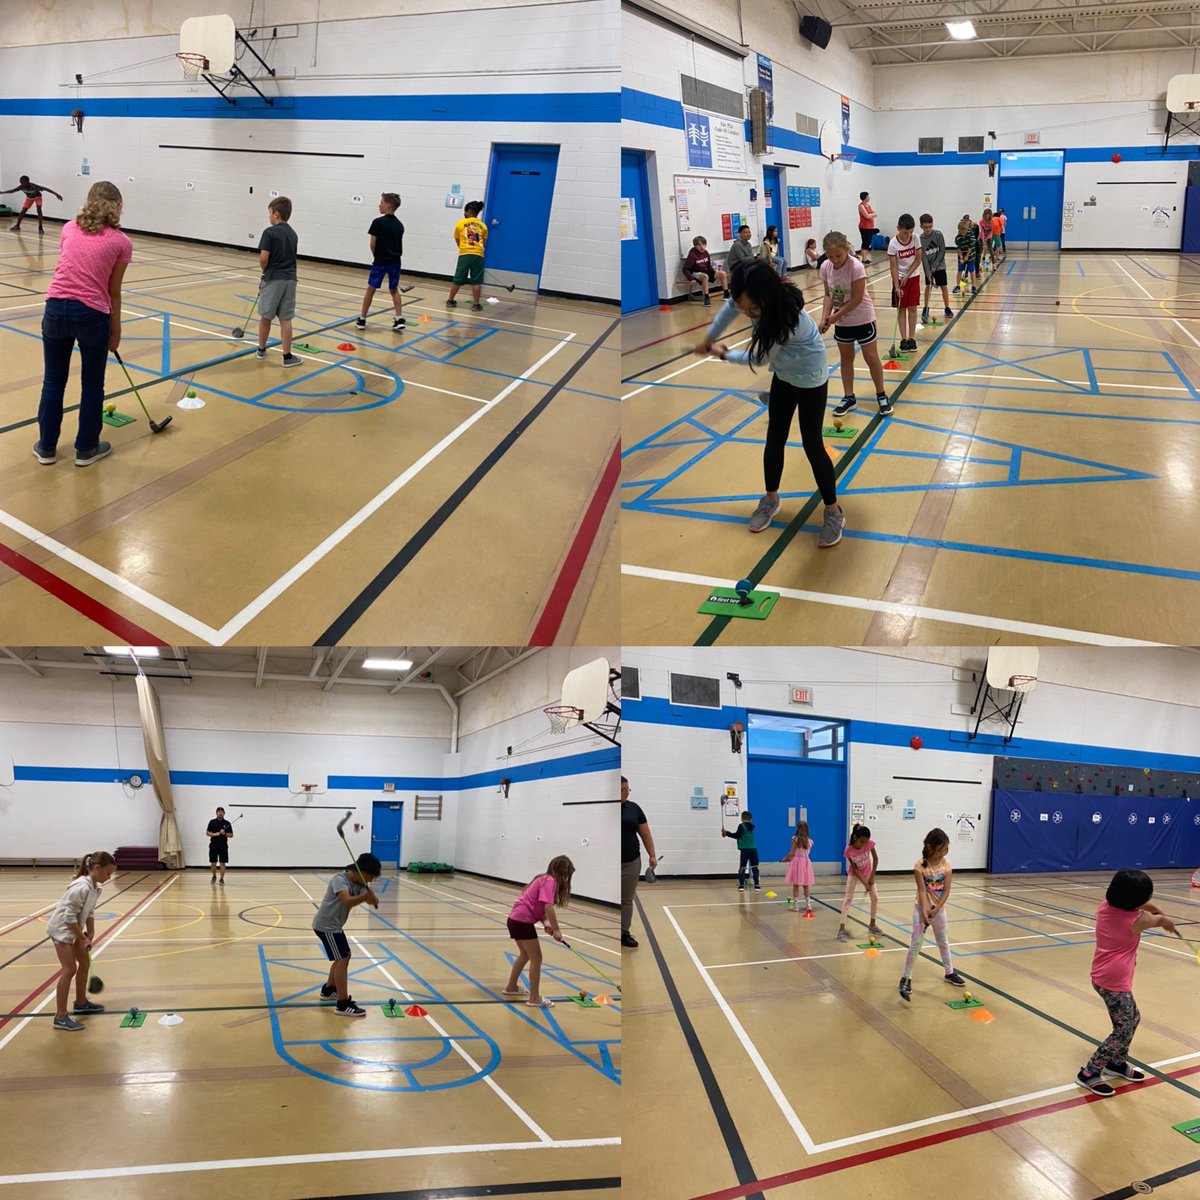 Thanks to Devin @GolfMb for the fantastic golf clinic he put on for our students! #seshsd #hsdlearns